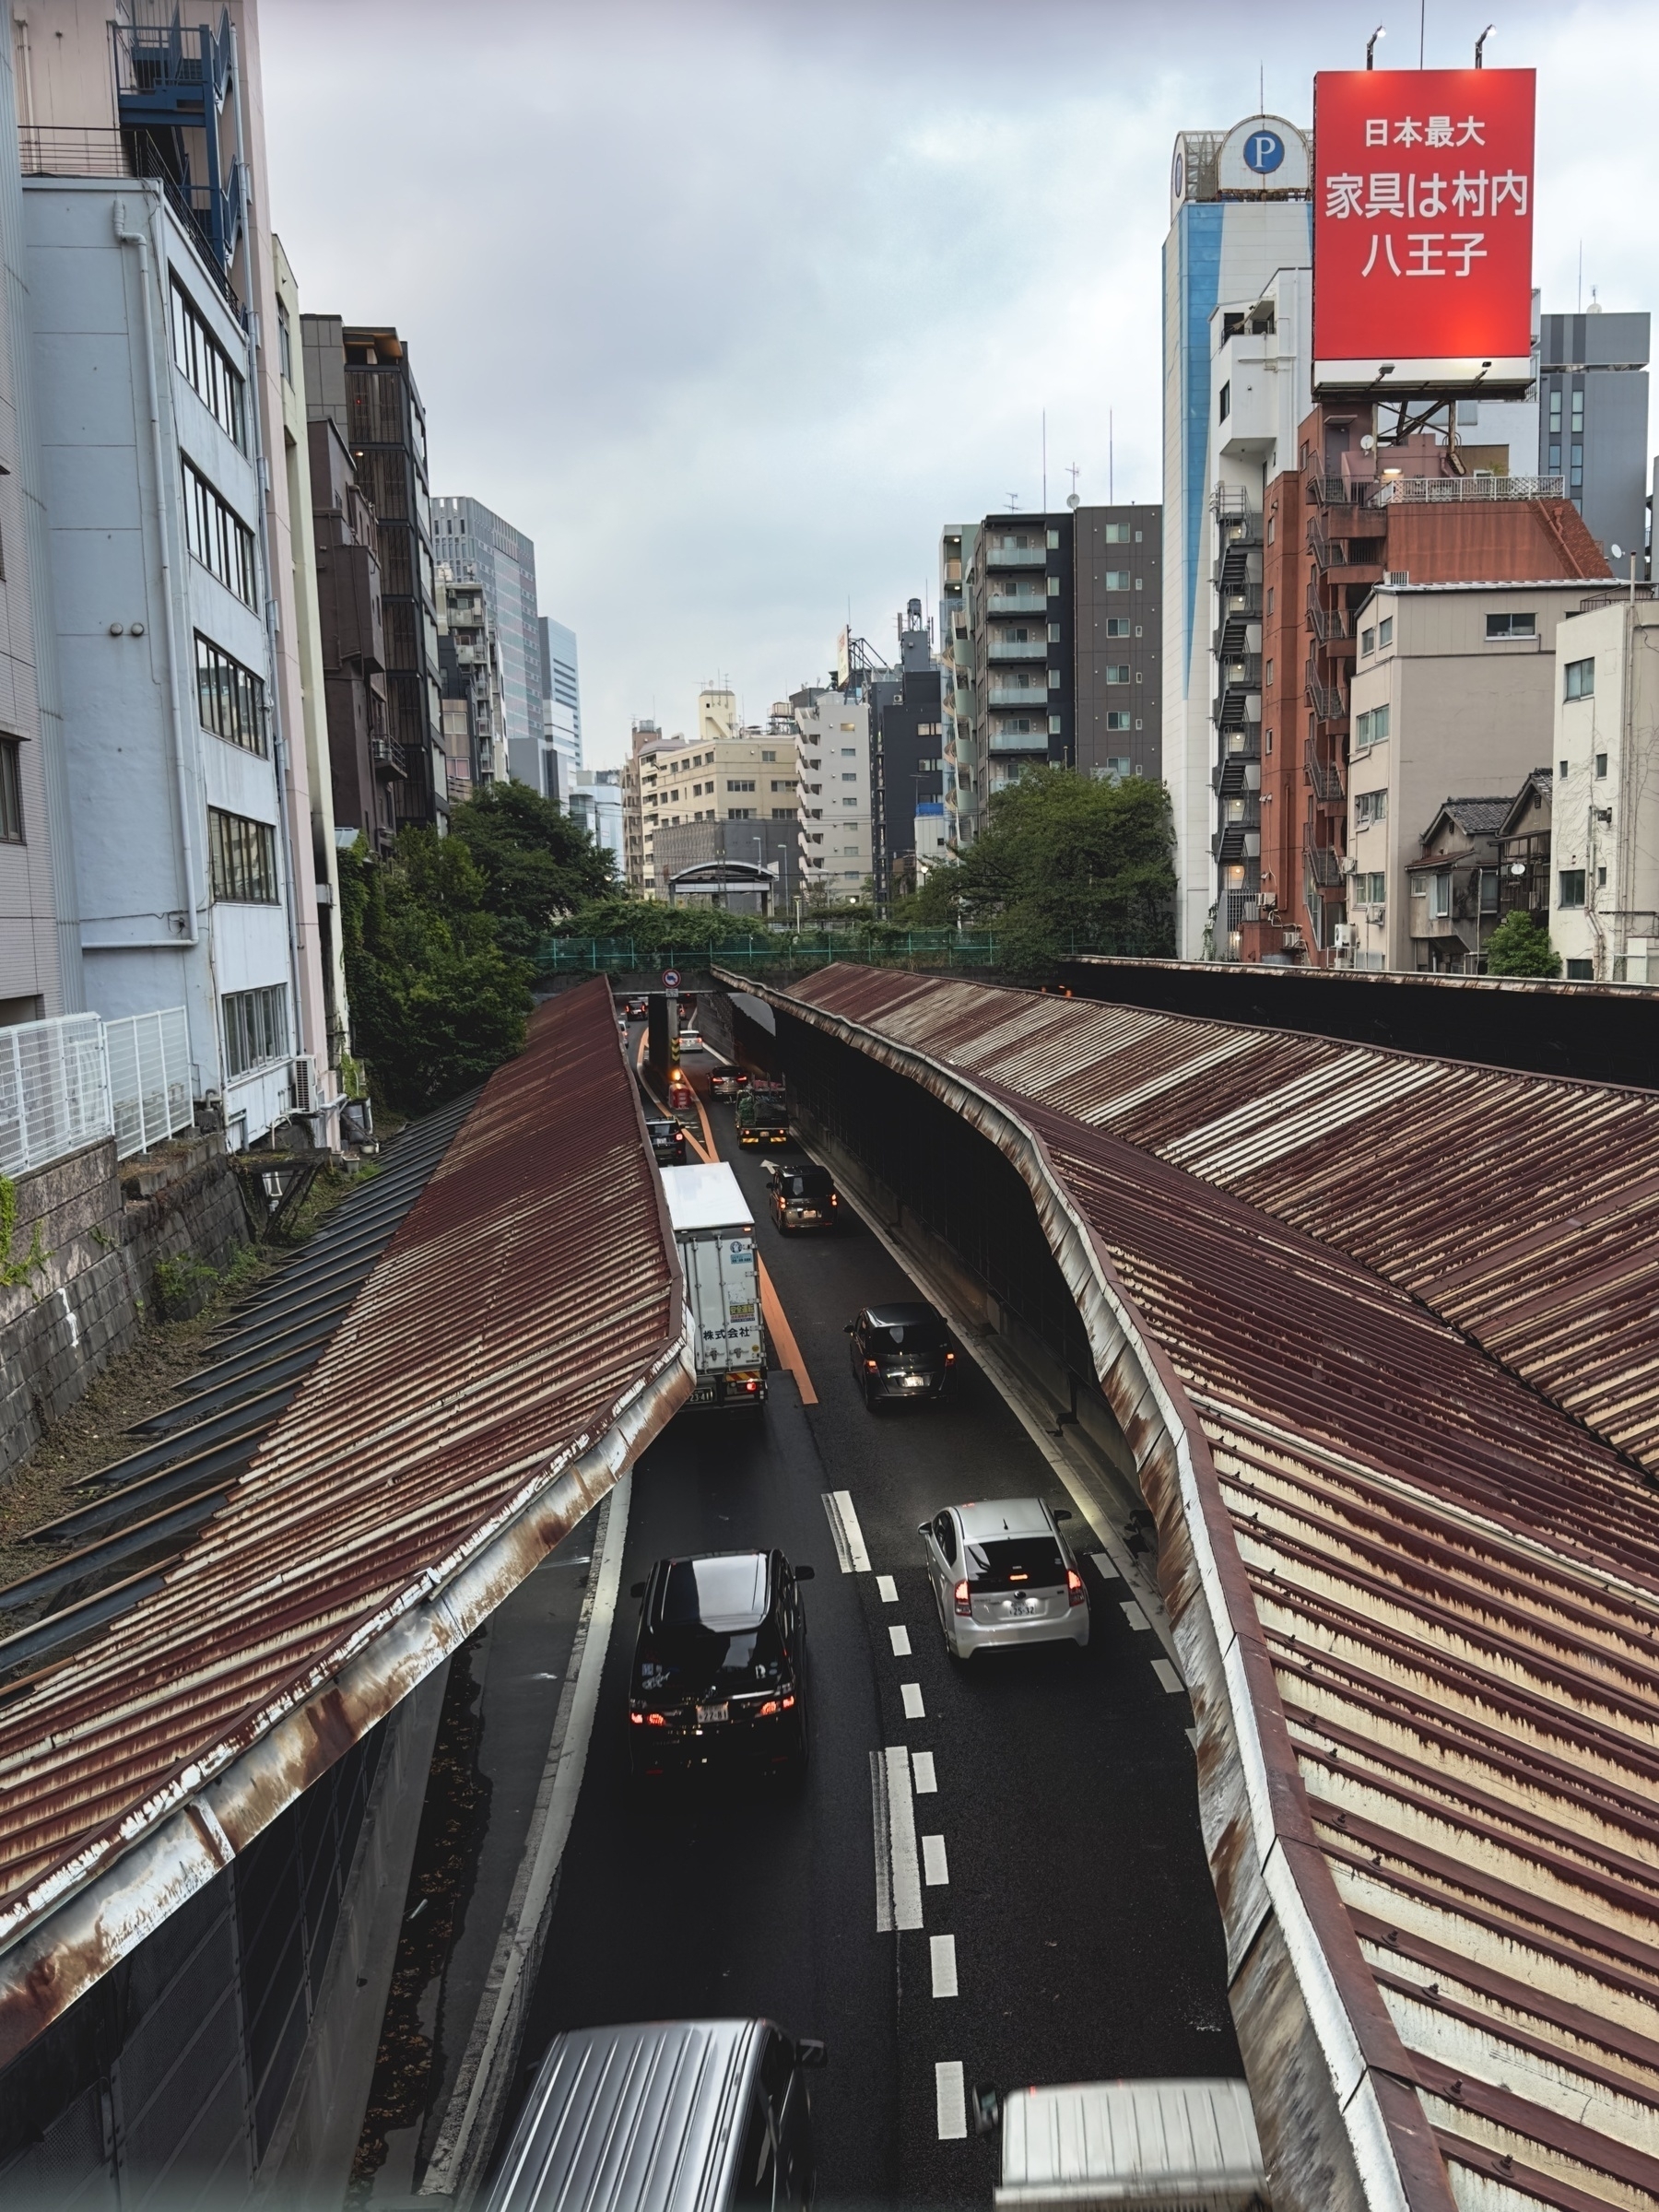 A Japanese city road surrounded by tall buildings with a heavily rusted top over the road